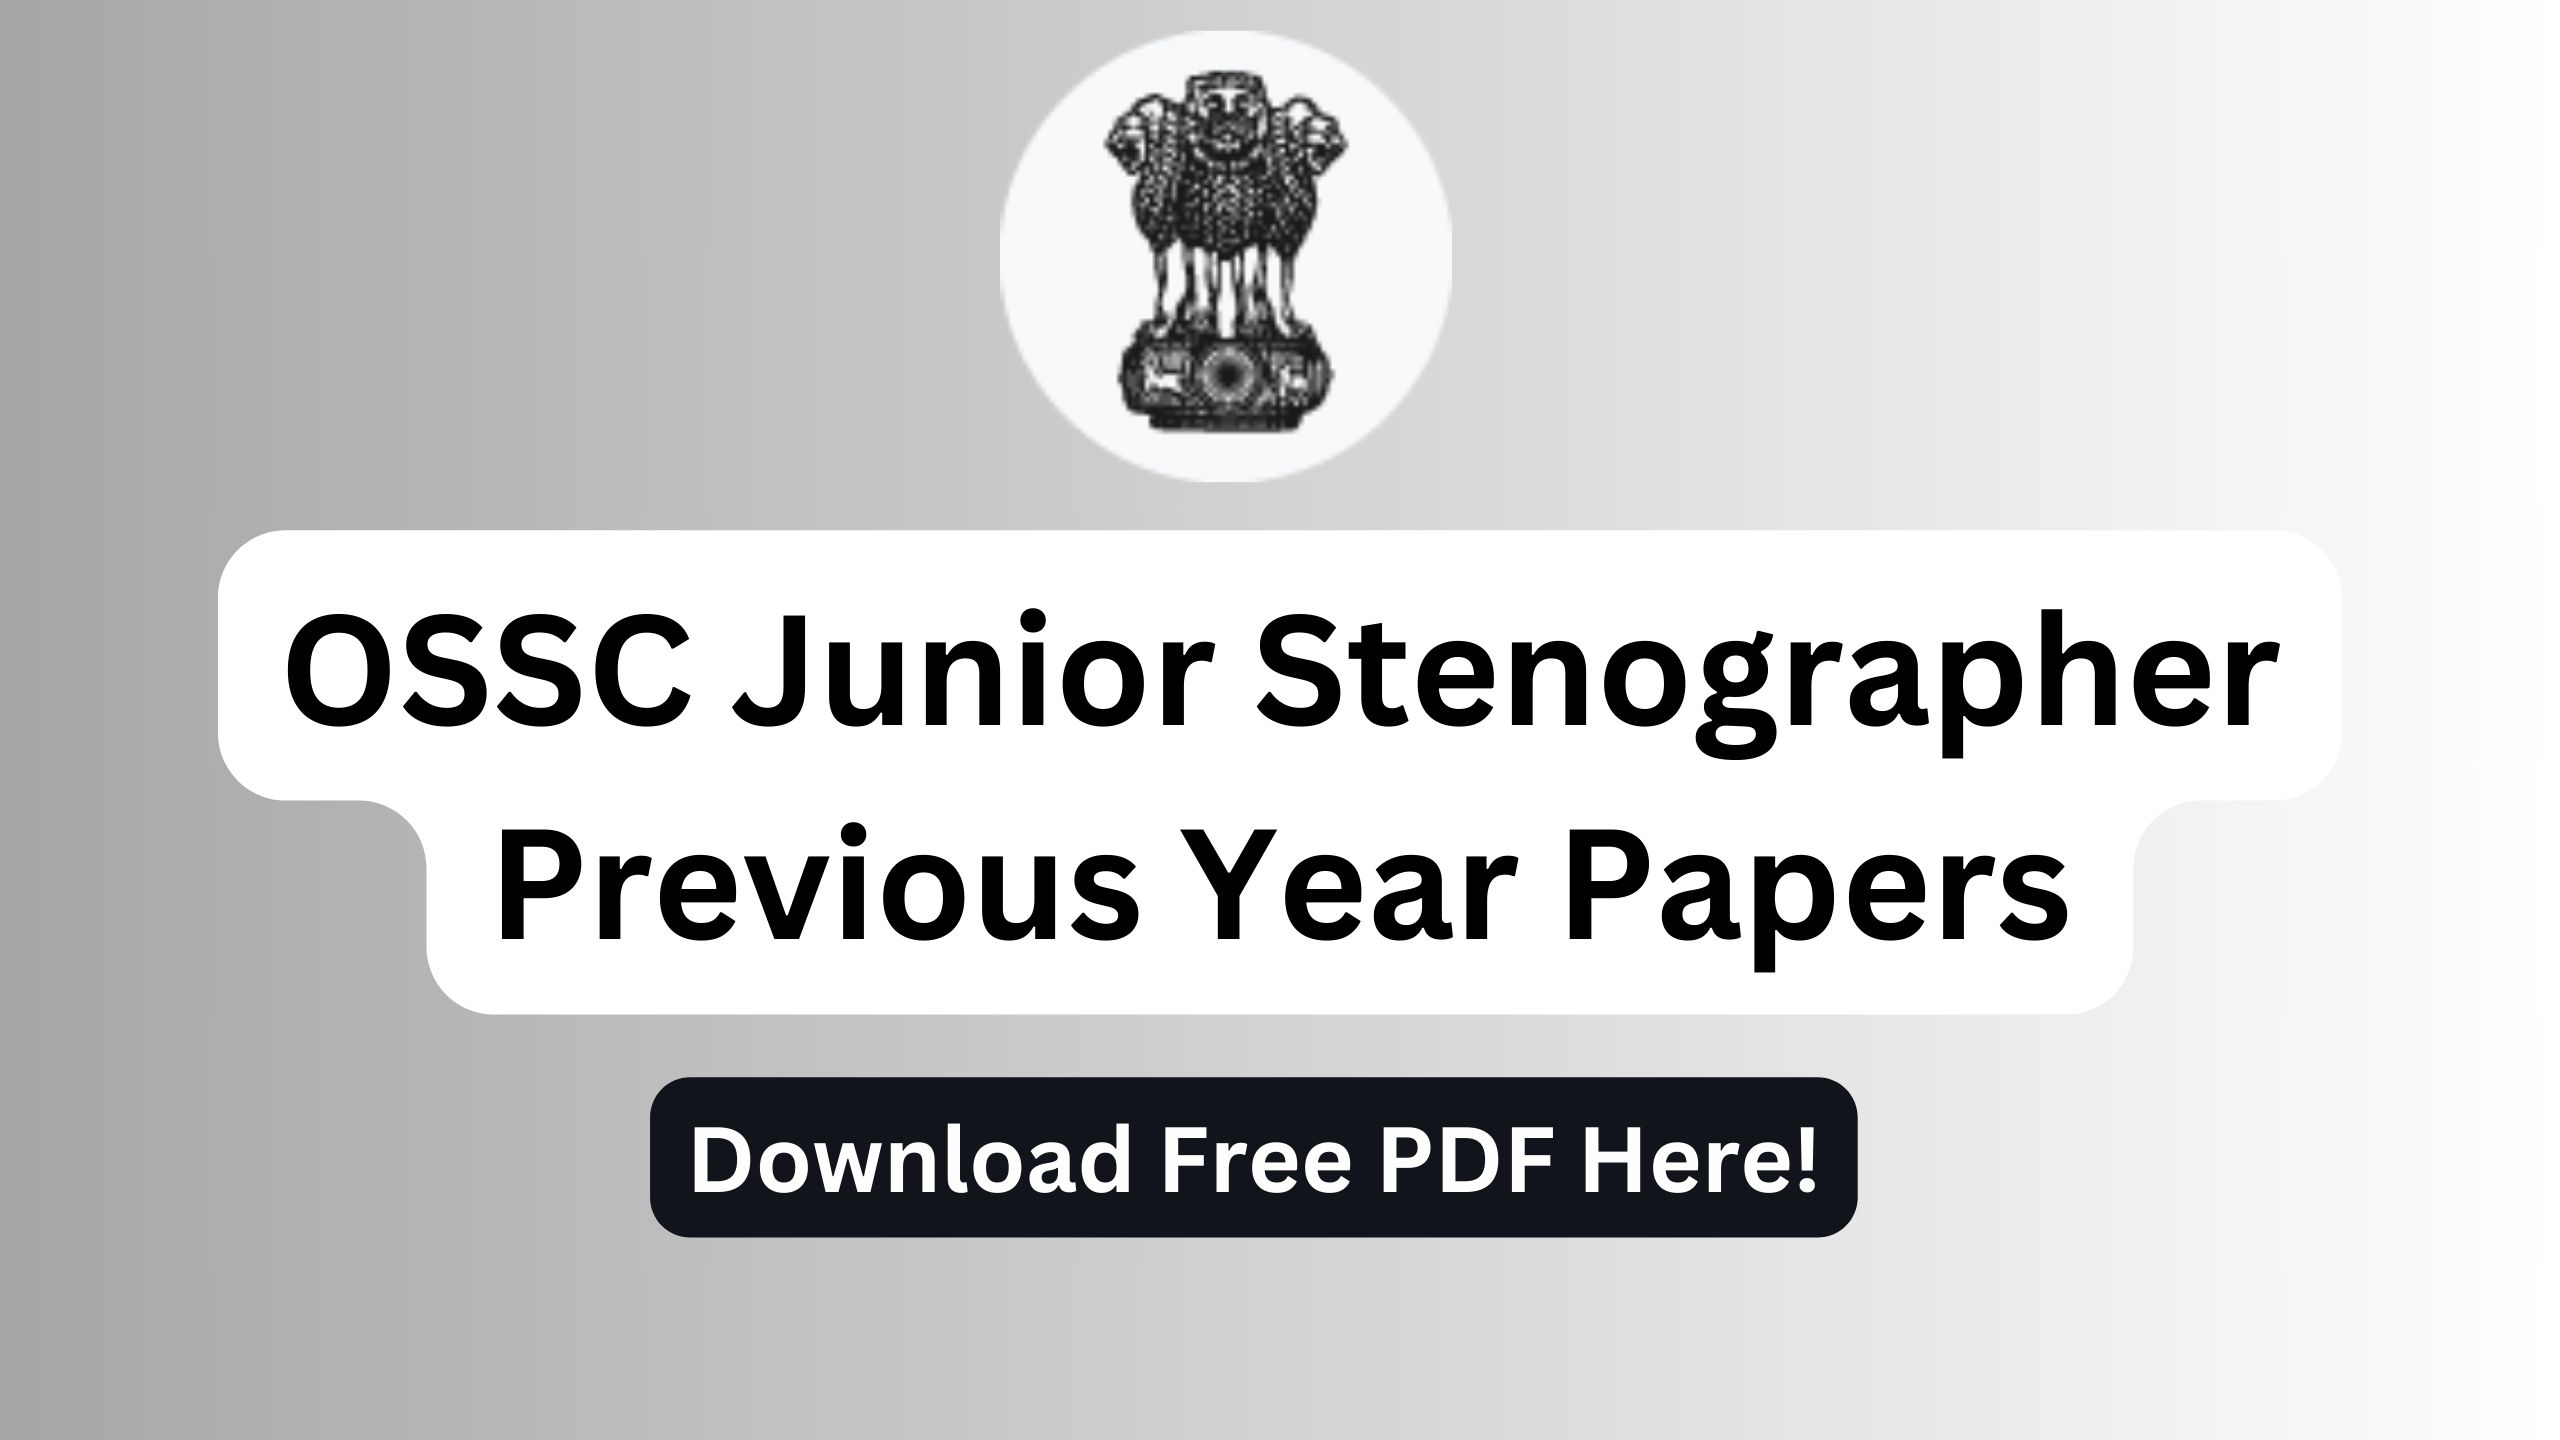 OSSC Junior Stenographer Previous Year Papers